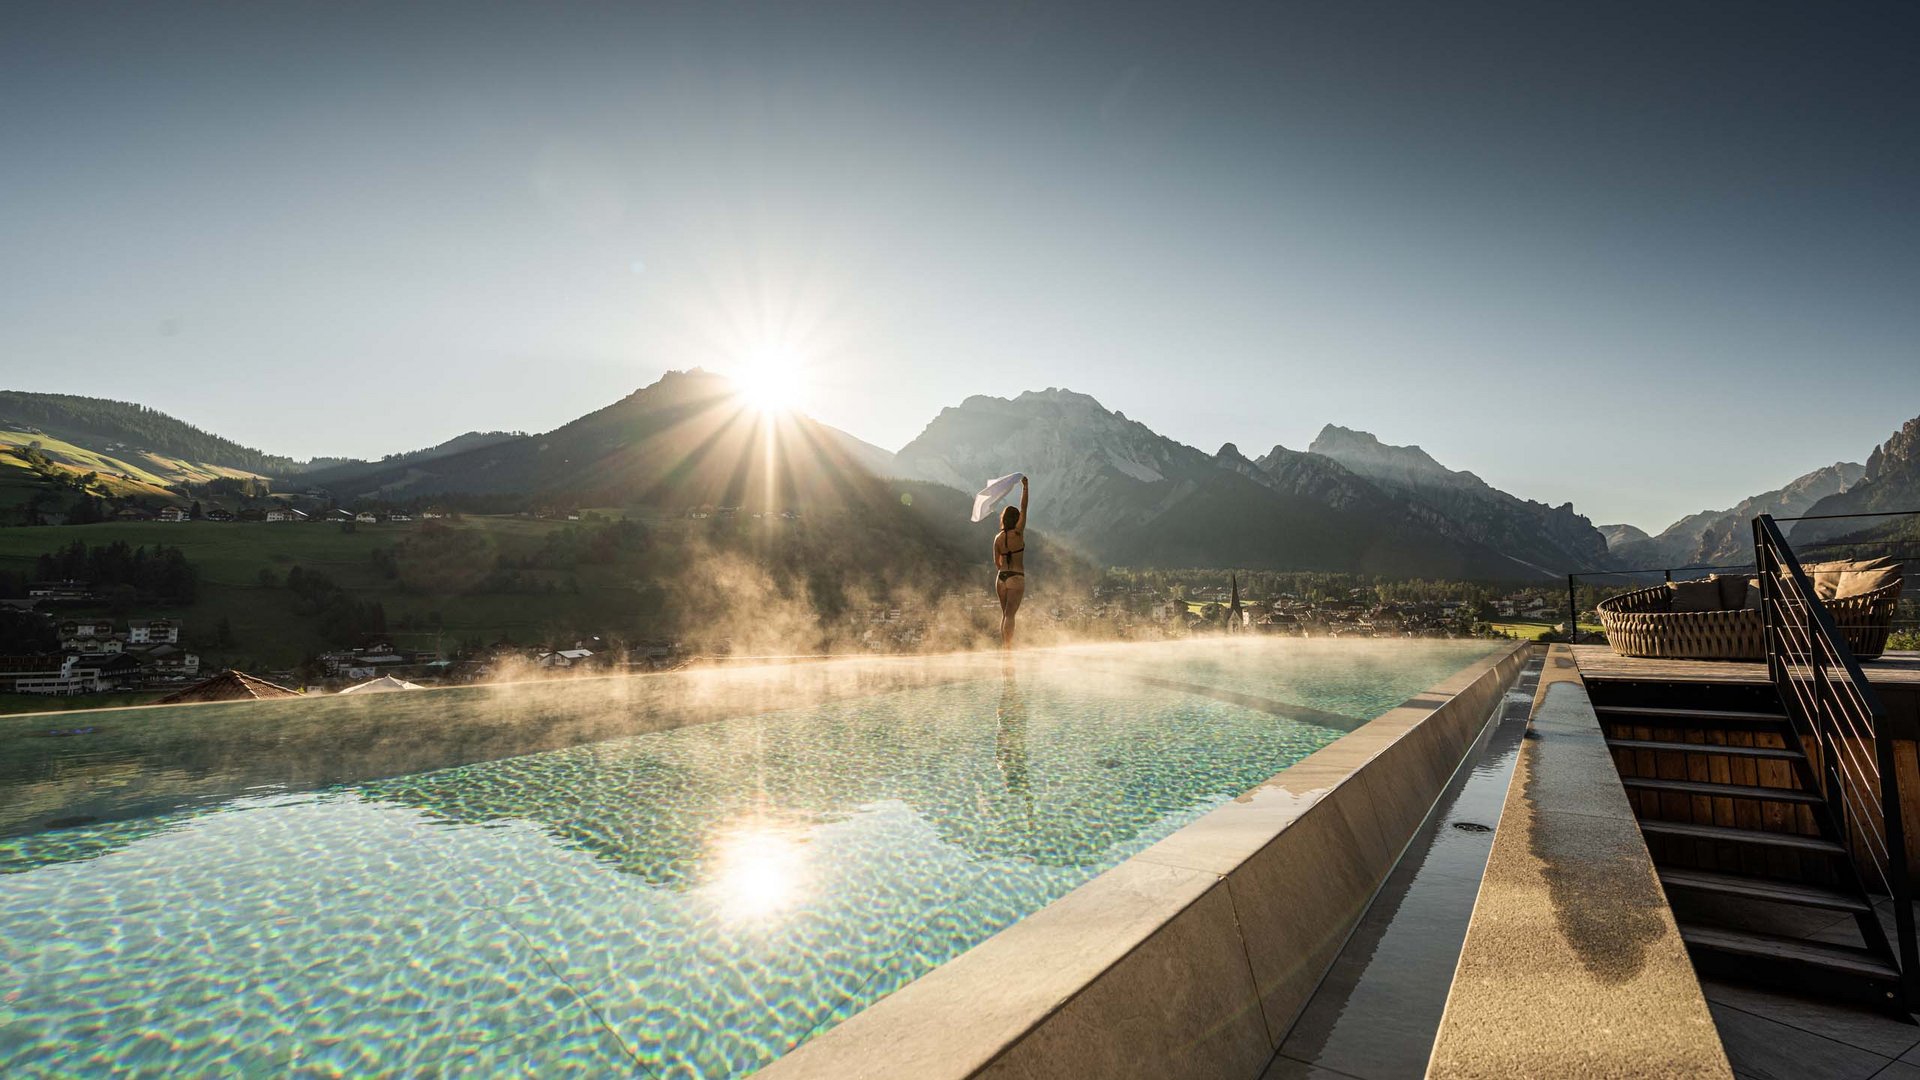 Excelsior – a holiday in the Dolomites couldn’t be better.